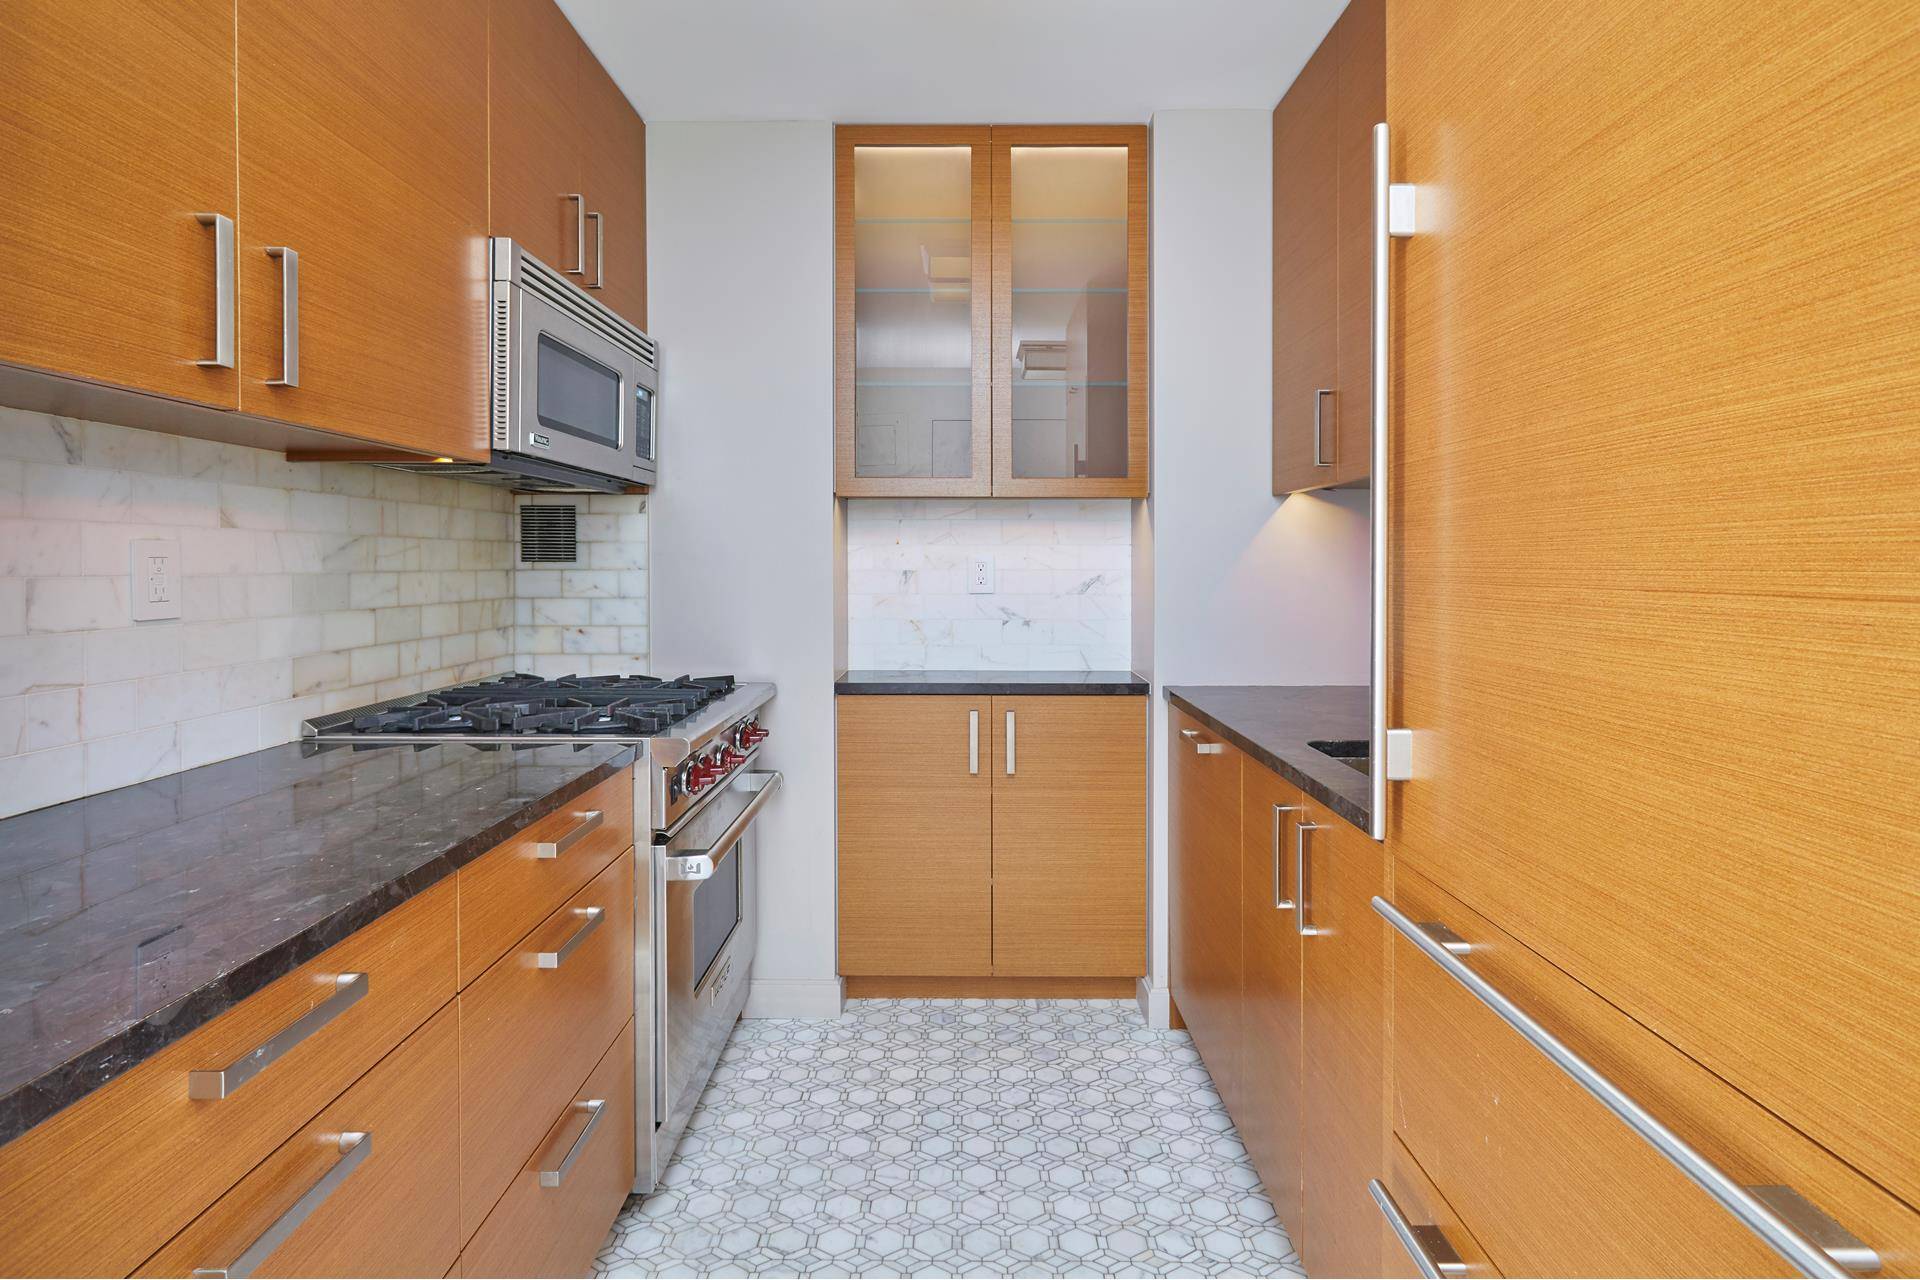 Perched on the 15th floor of The East River House, Residence 15D is a completely gut renovated spacious 1 bedroom 1 bathroom with an abundance of space, light and style.